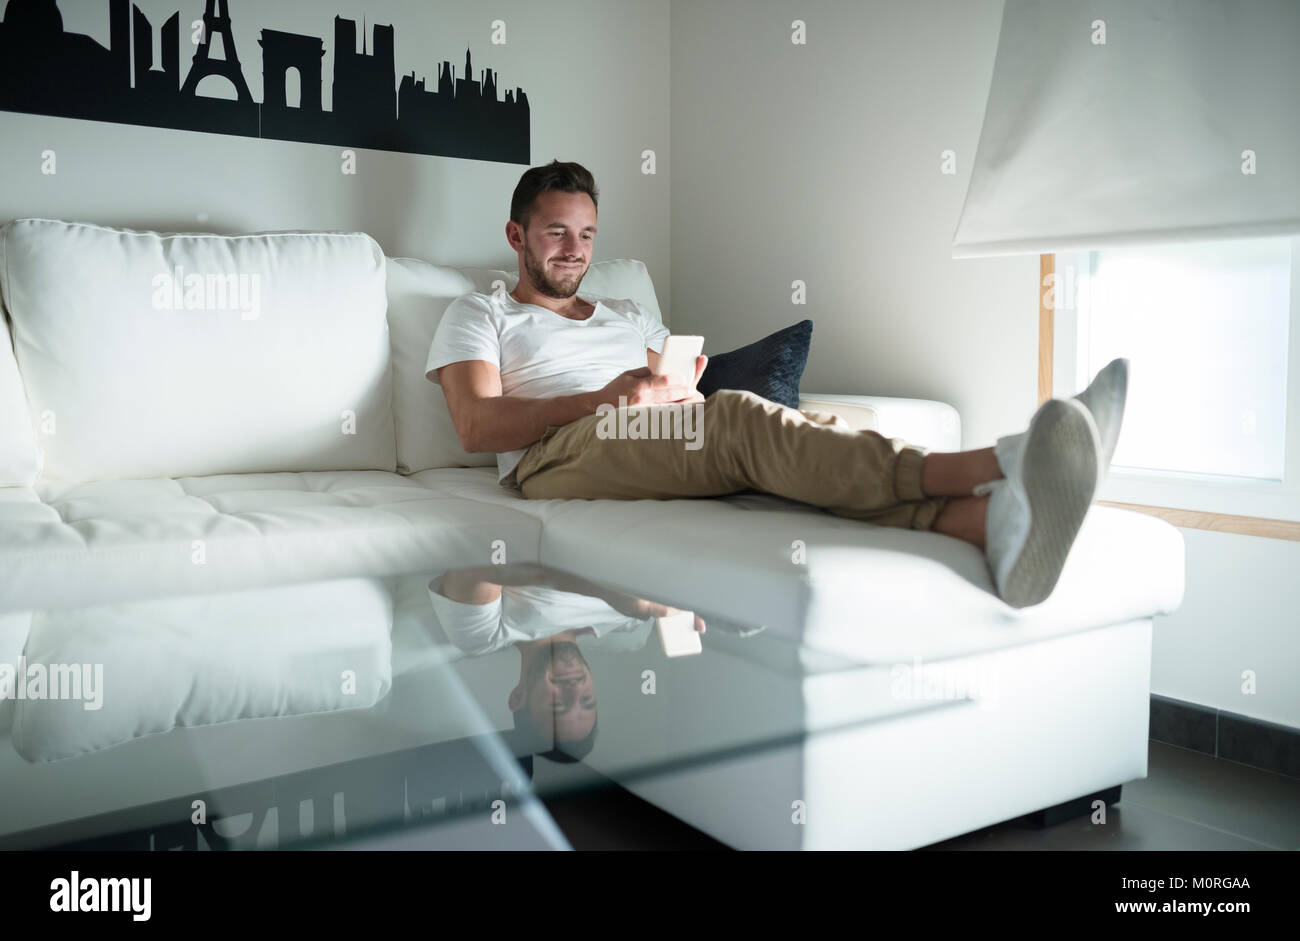 Smiling young man relaxing at home with his smartphone Stock Photo